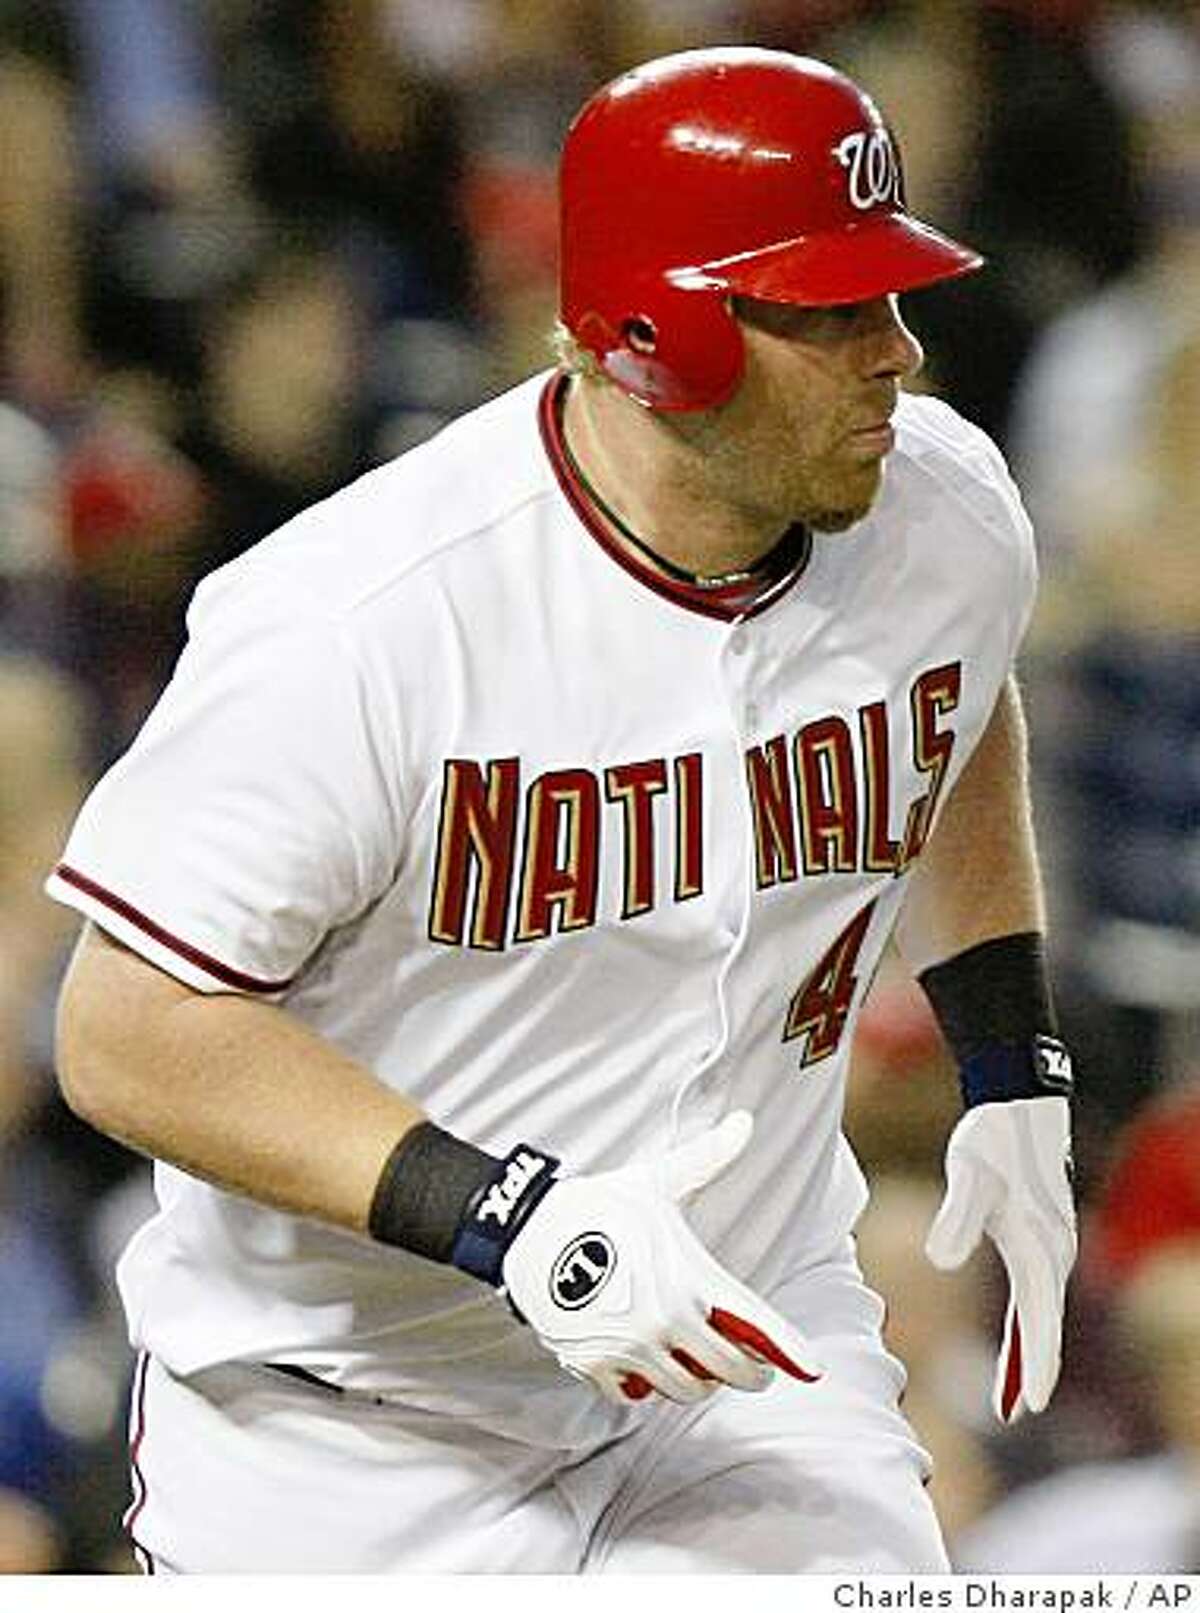 Washington Nationals' Adam Dunn is wearing a jersey spelled "Natinals" as he flies out to center field during the third inning of a baseball game against the Florida Marlins in Washington, Friday, April 17, 2009. The Marlins won 3-2. (AP Photo/Charles Dharapak)